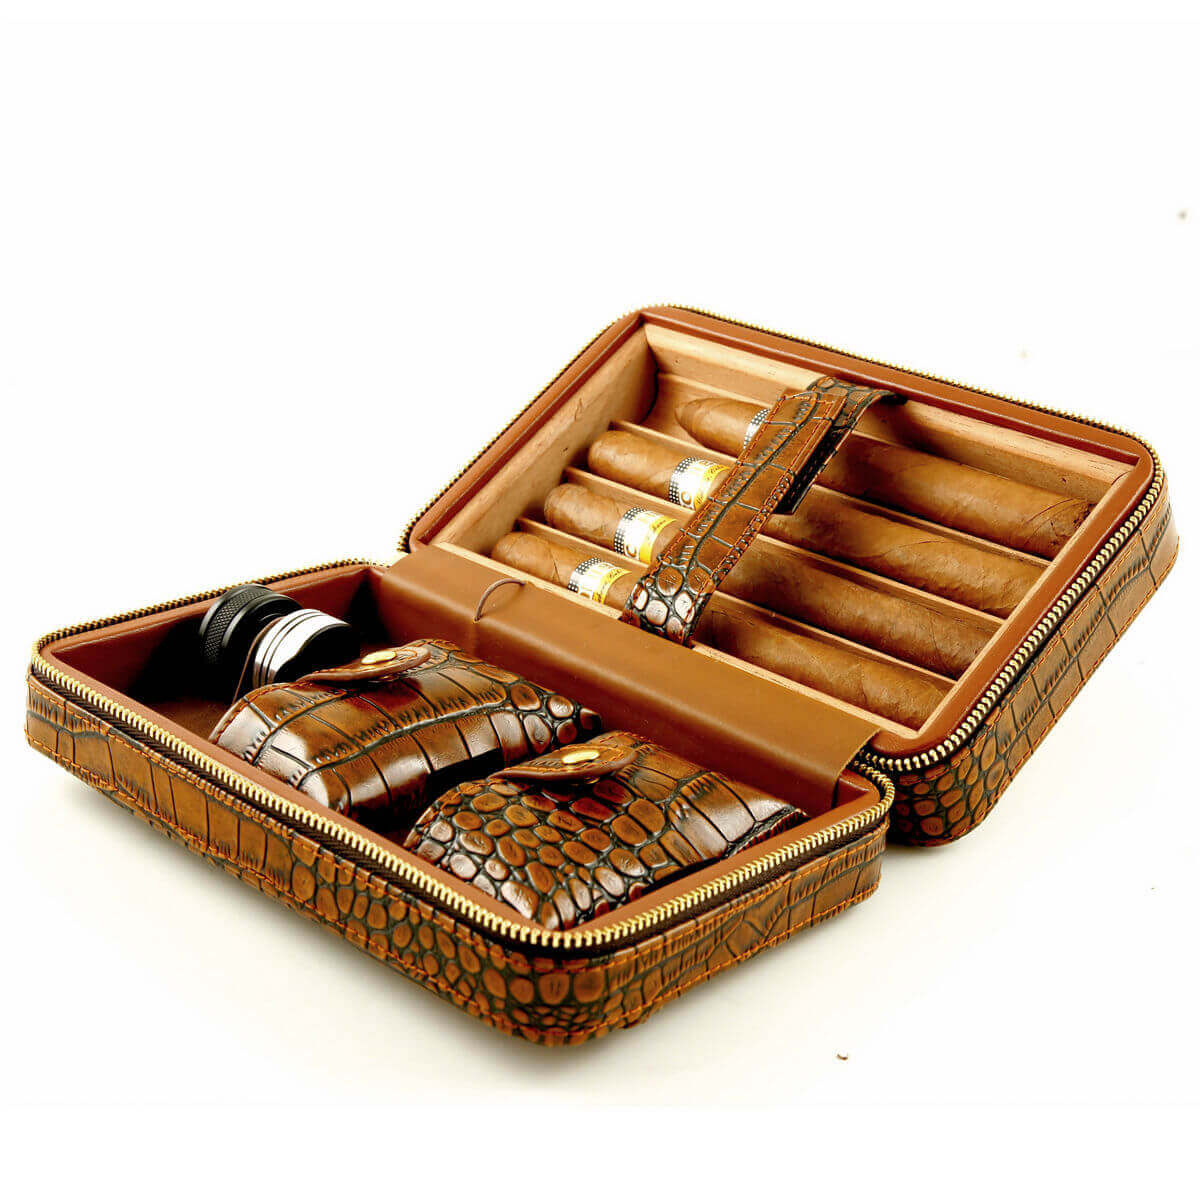 leather travel humidors for cigars